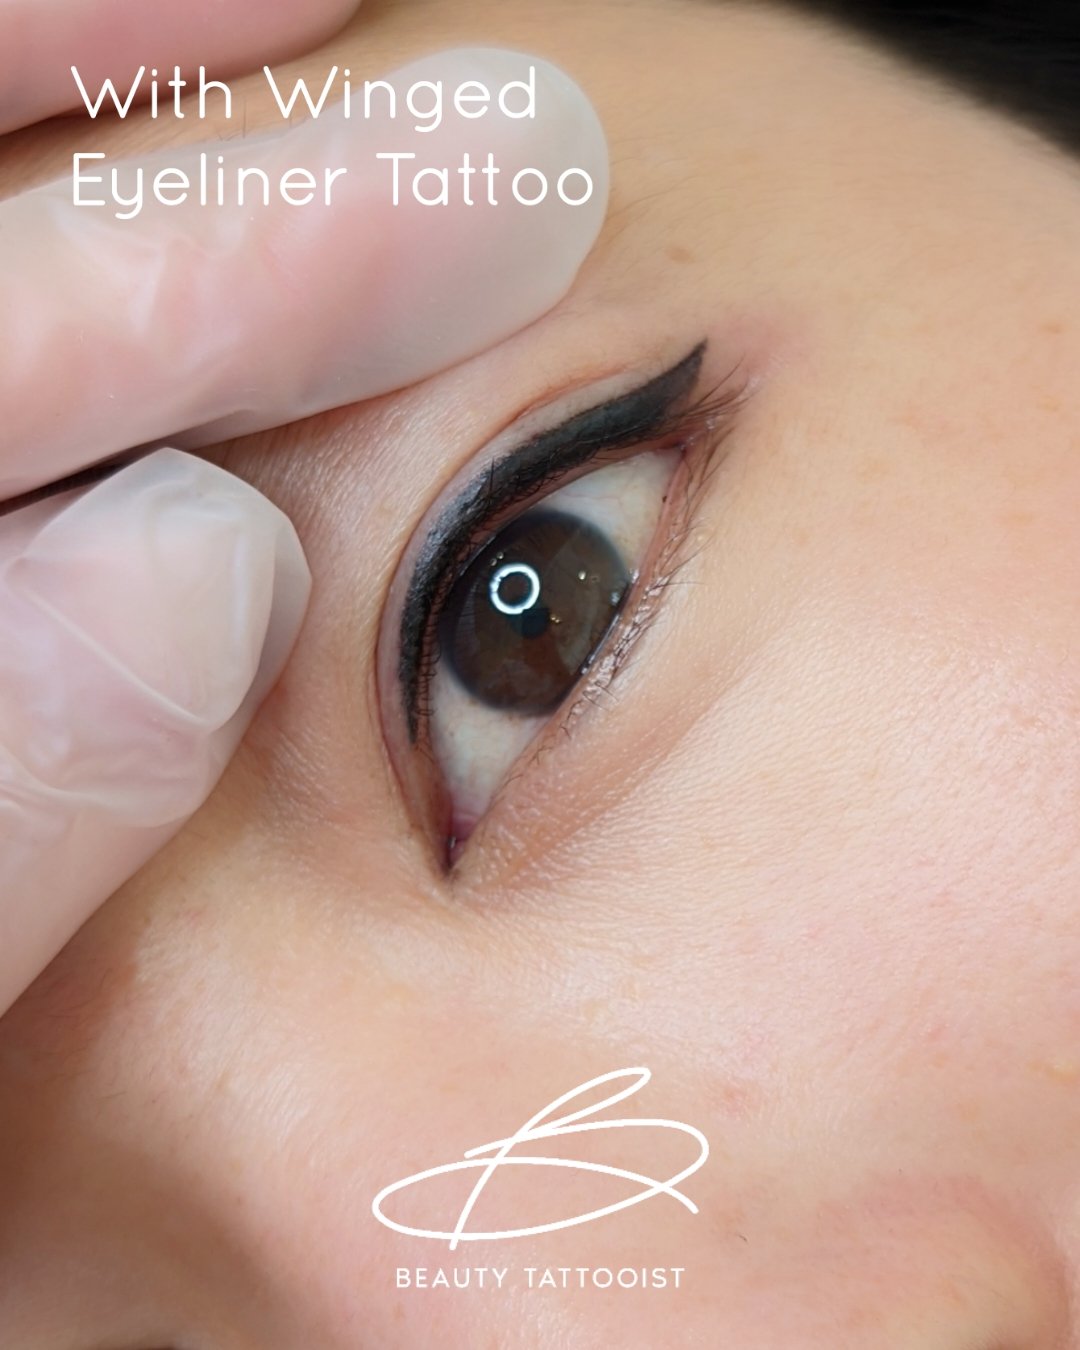 Eyebrow Laser Tattoo Removal Vancouver | Permanent Makeup